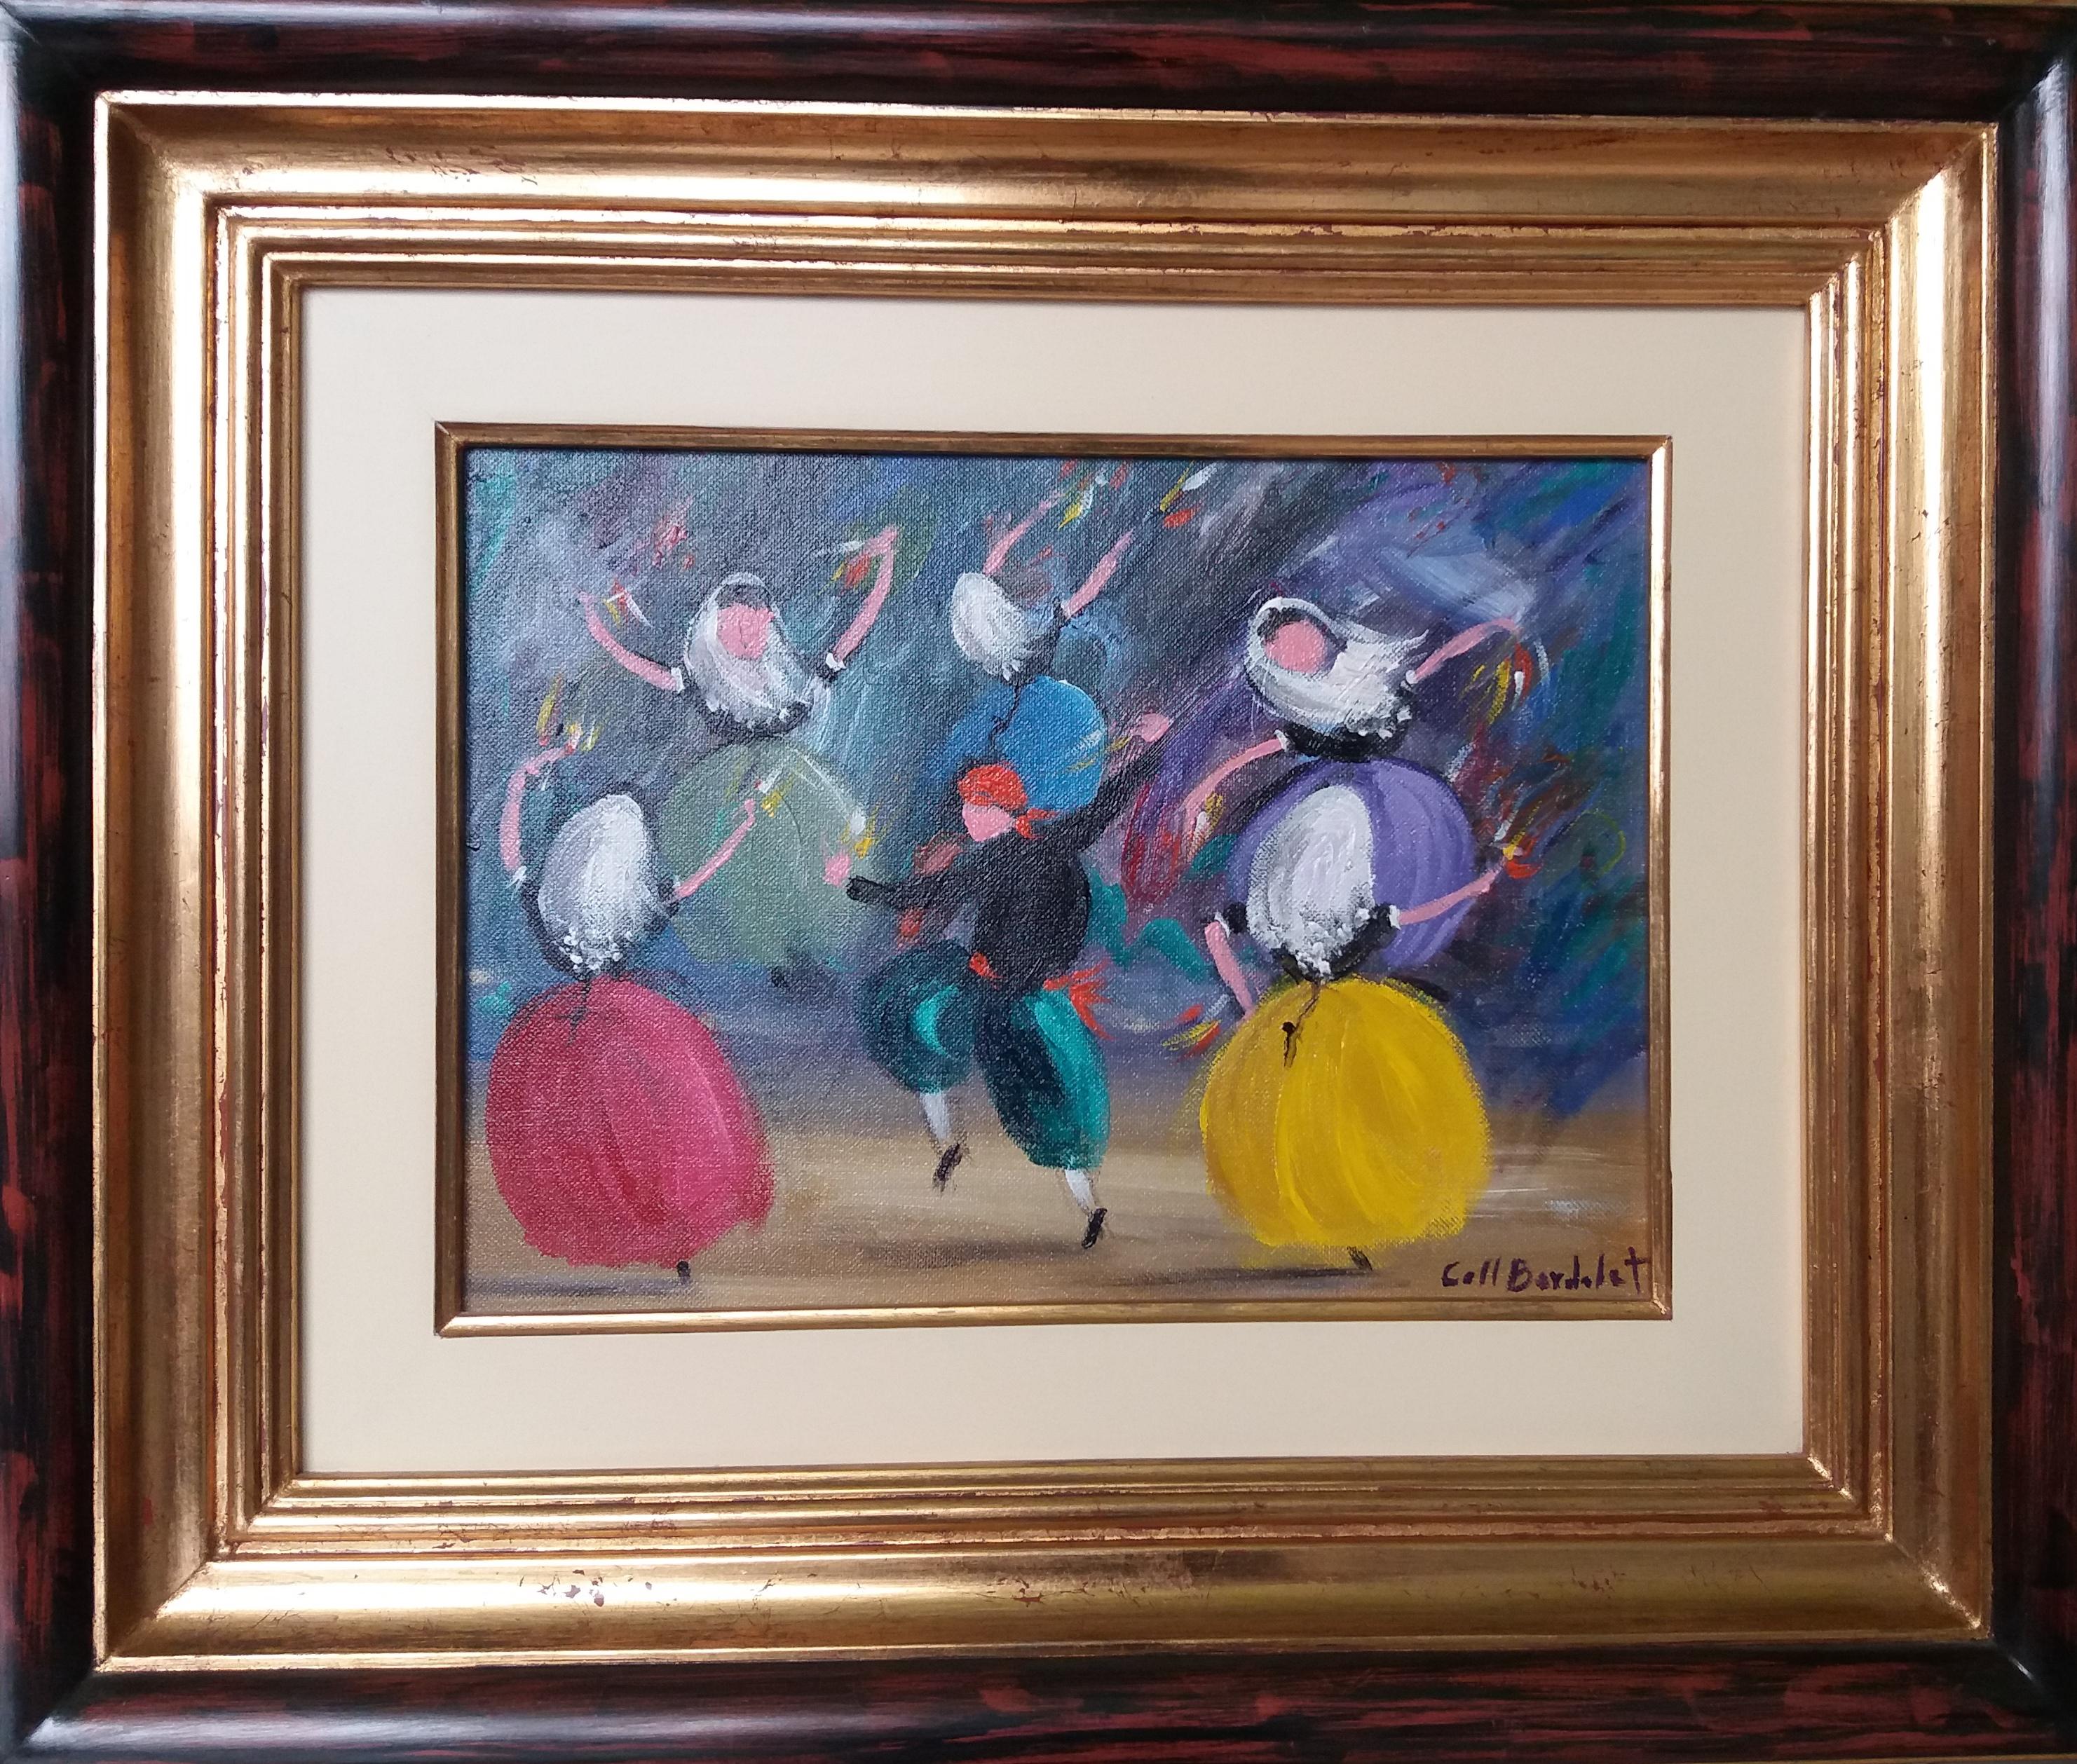  BOLERO. original expressionist acrylic painting. framed
Spanish painter maximum representative of the art of Mallorca at the end of the 20th century. Costumbrista work. With different own museums in different sites exhibited in the main galleries